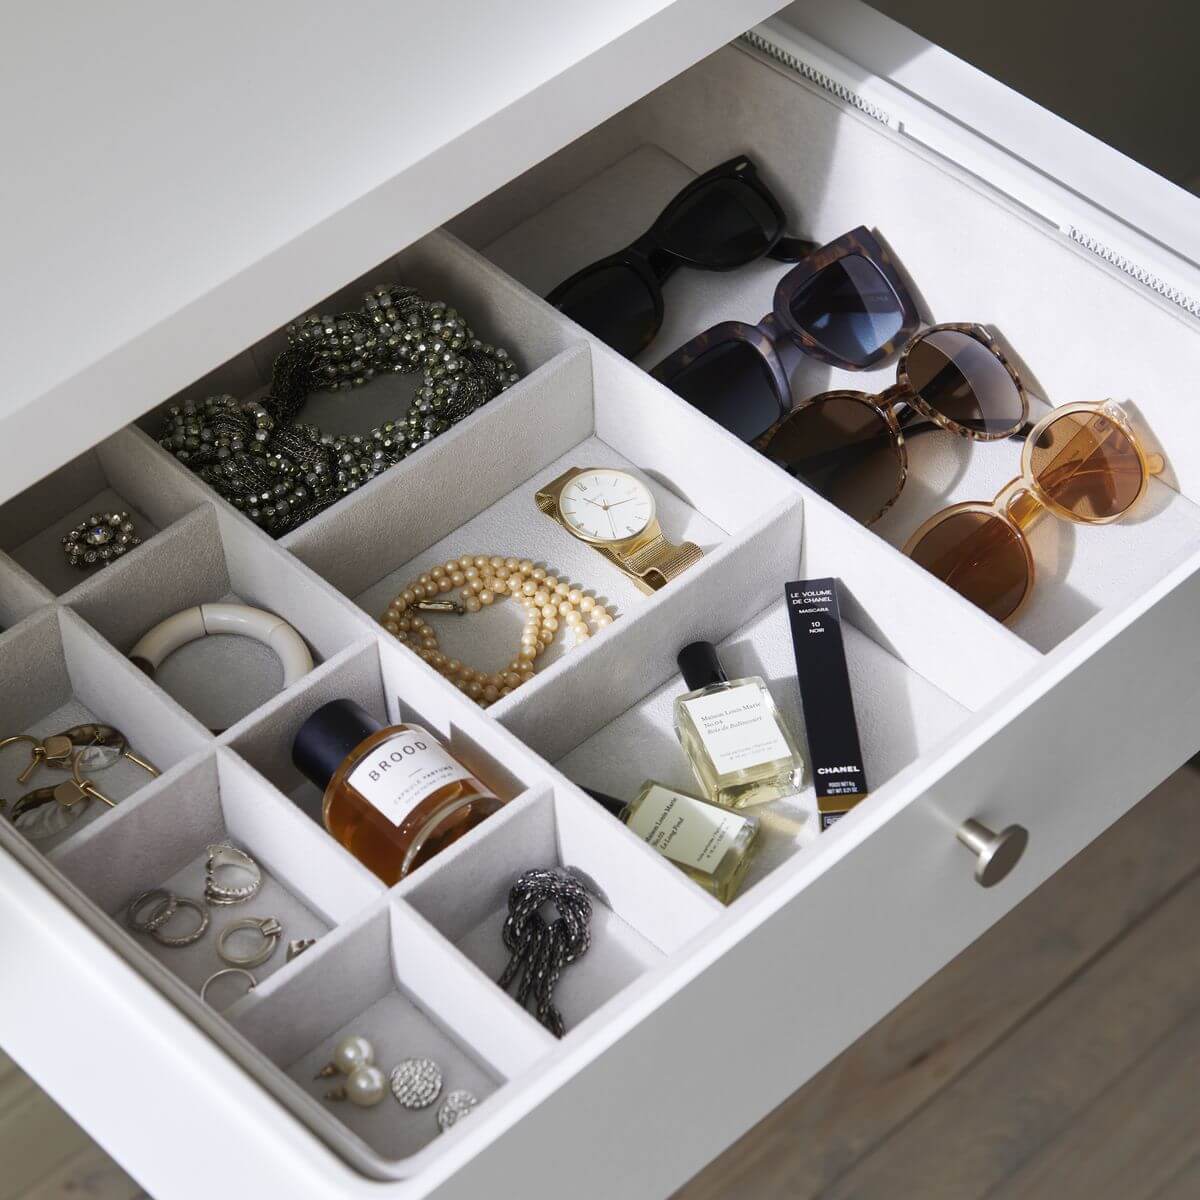 An Elfa jewellery storage tray used to organise jewellery, glasses and watches in an Elfa Gliding Mesh Wardrobe Drawer